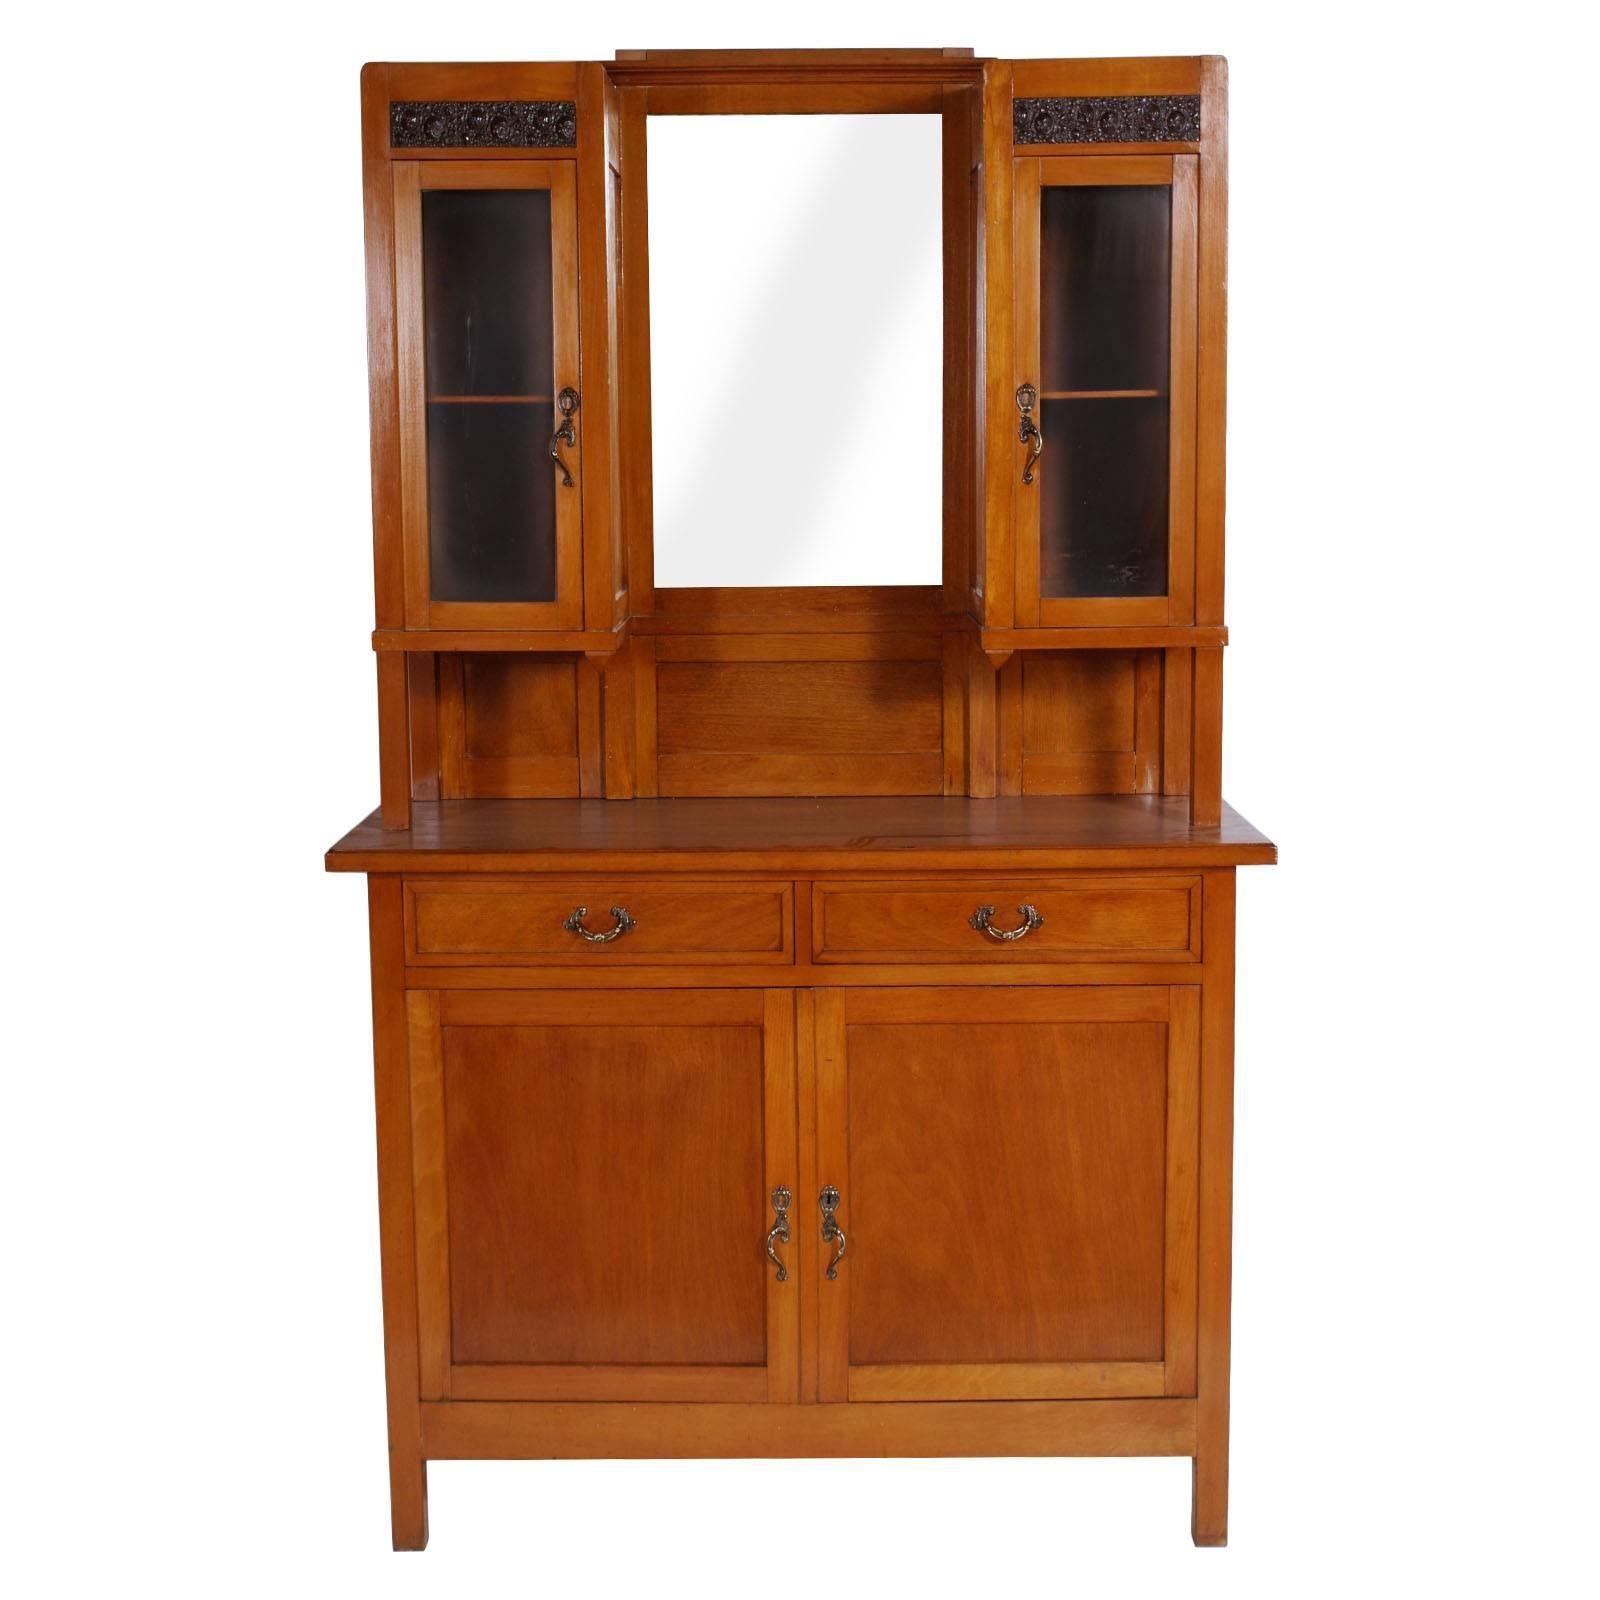 1890s, Art Nouveau mirrored credenza with display cabinet all in solid cherrywood. Elegant cast bronze panels with Classic floral motifs of the period. Beveled mirror, glass, handles and original accessories of the period.
Polished to wax.
Measures